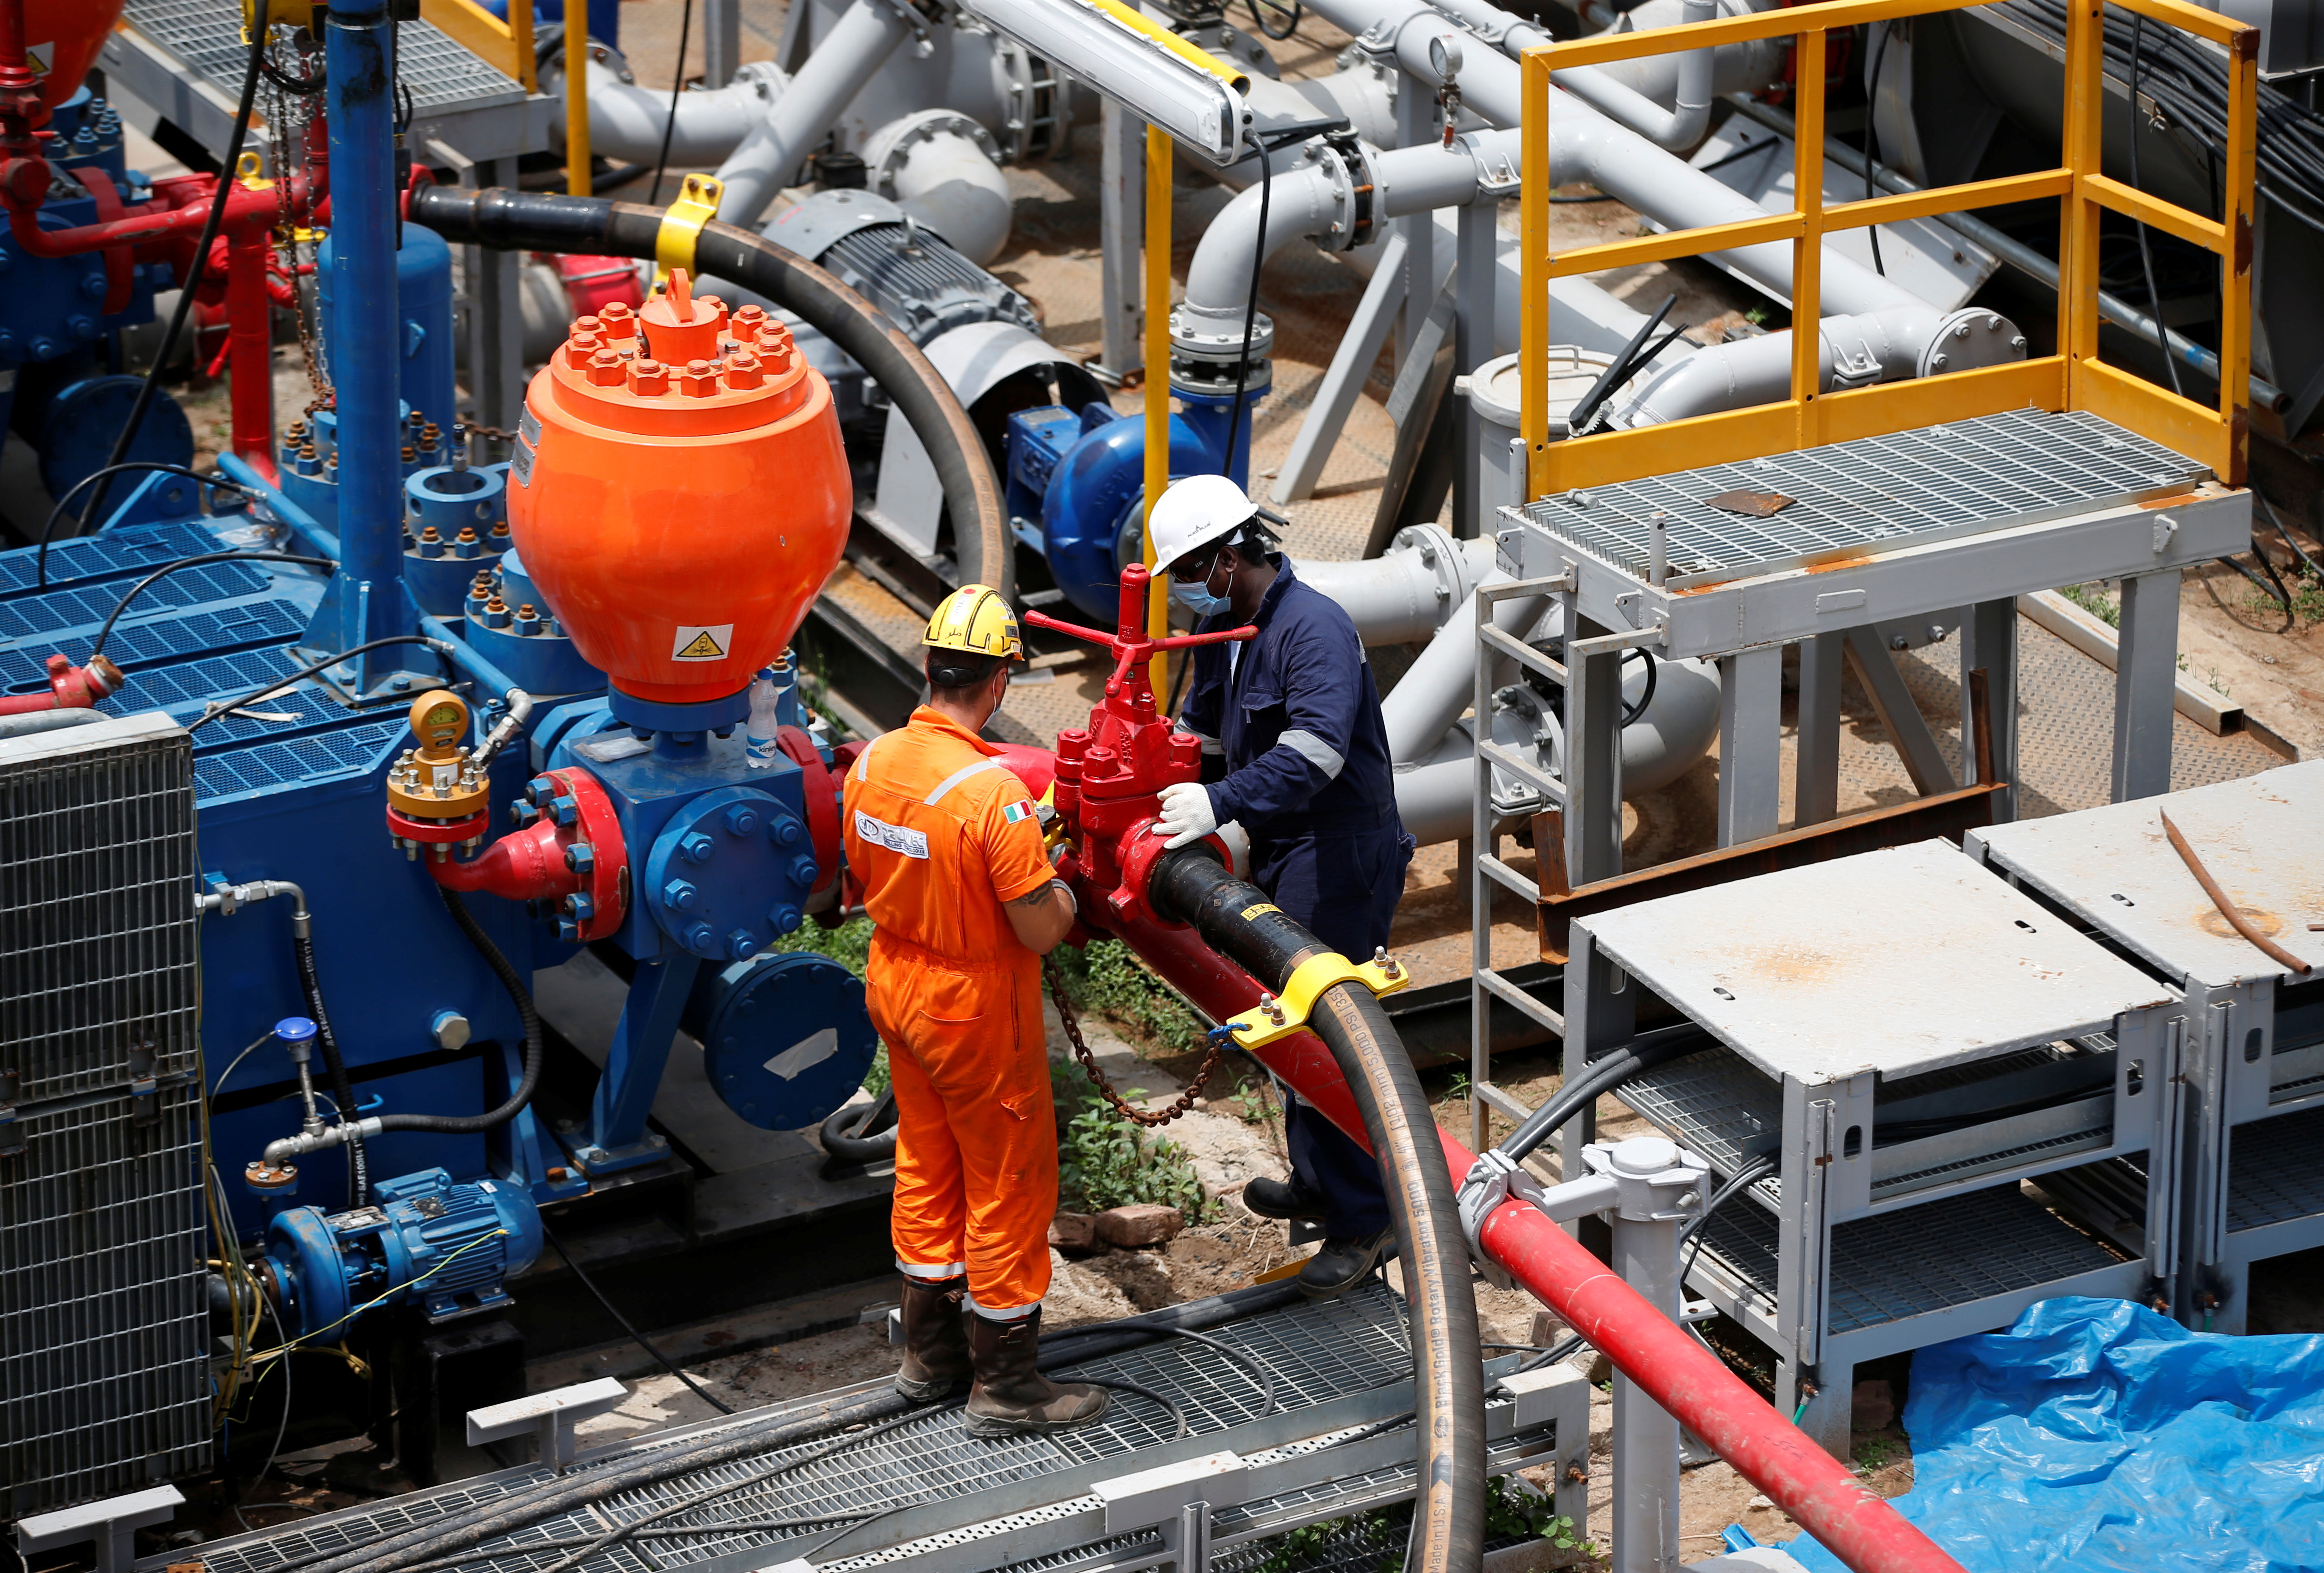 Technicians work at an oil rig manufactured by Megha Engineering and Infrastructures Limited (MEIL) at an Oil and Natural Gas Corp (ONGC) plant, during a media tour of the plant in Dhamasna